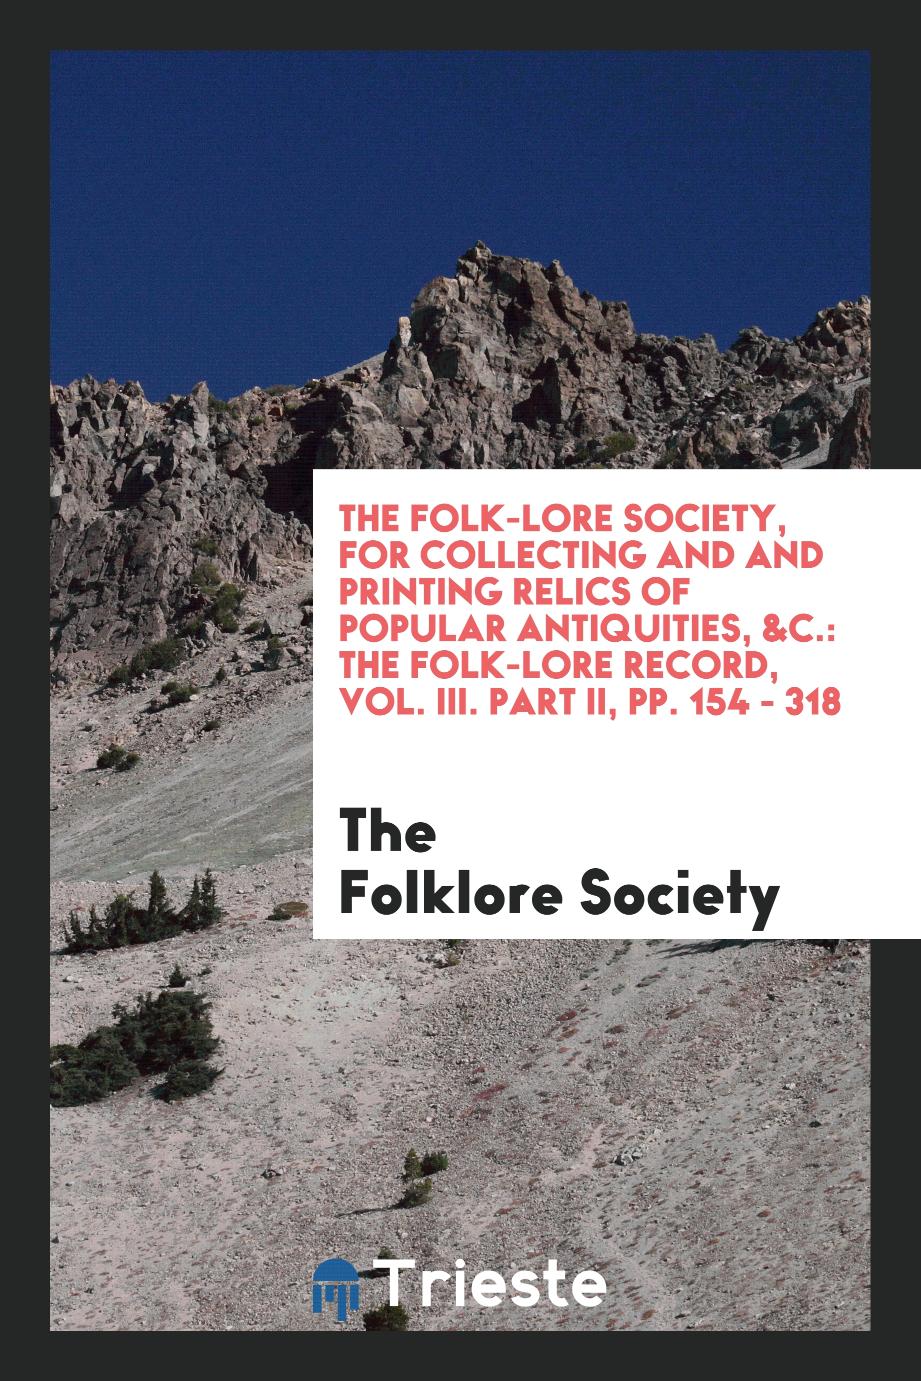 The Folk-Lore Society, for collecting and and printing relics of popular antiquities, &c.: The Folk-Lore Record, Vol. III. Part II, pp. 154 - 318